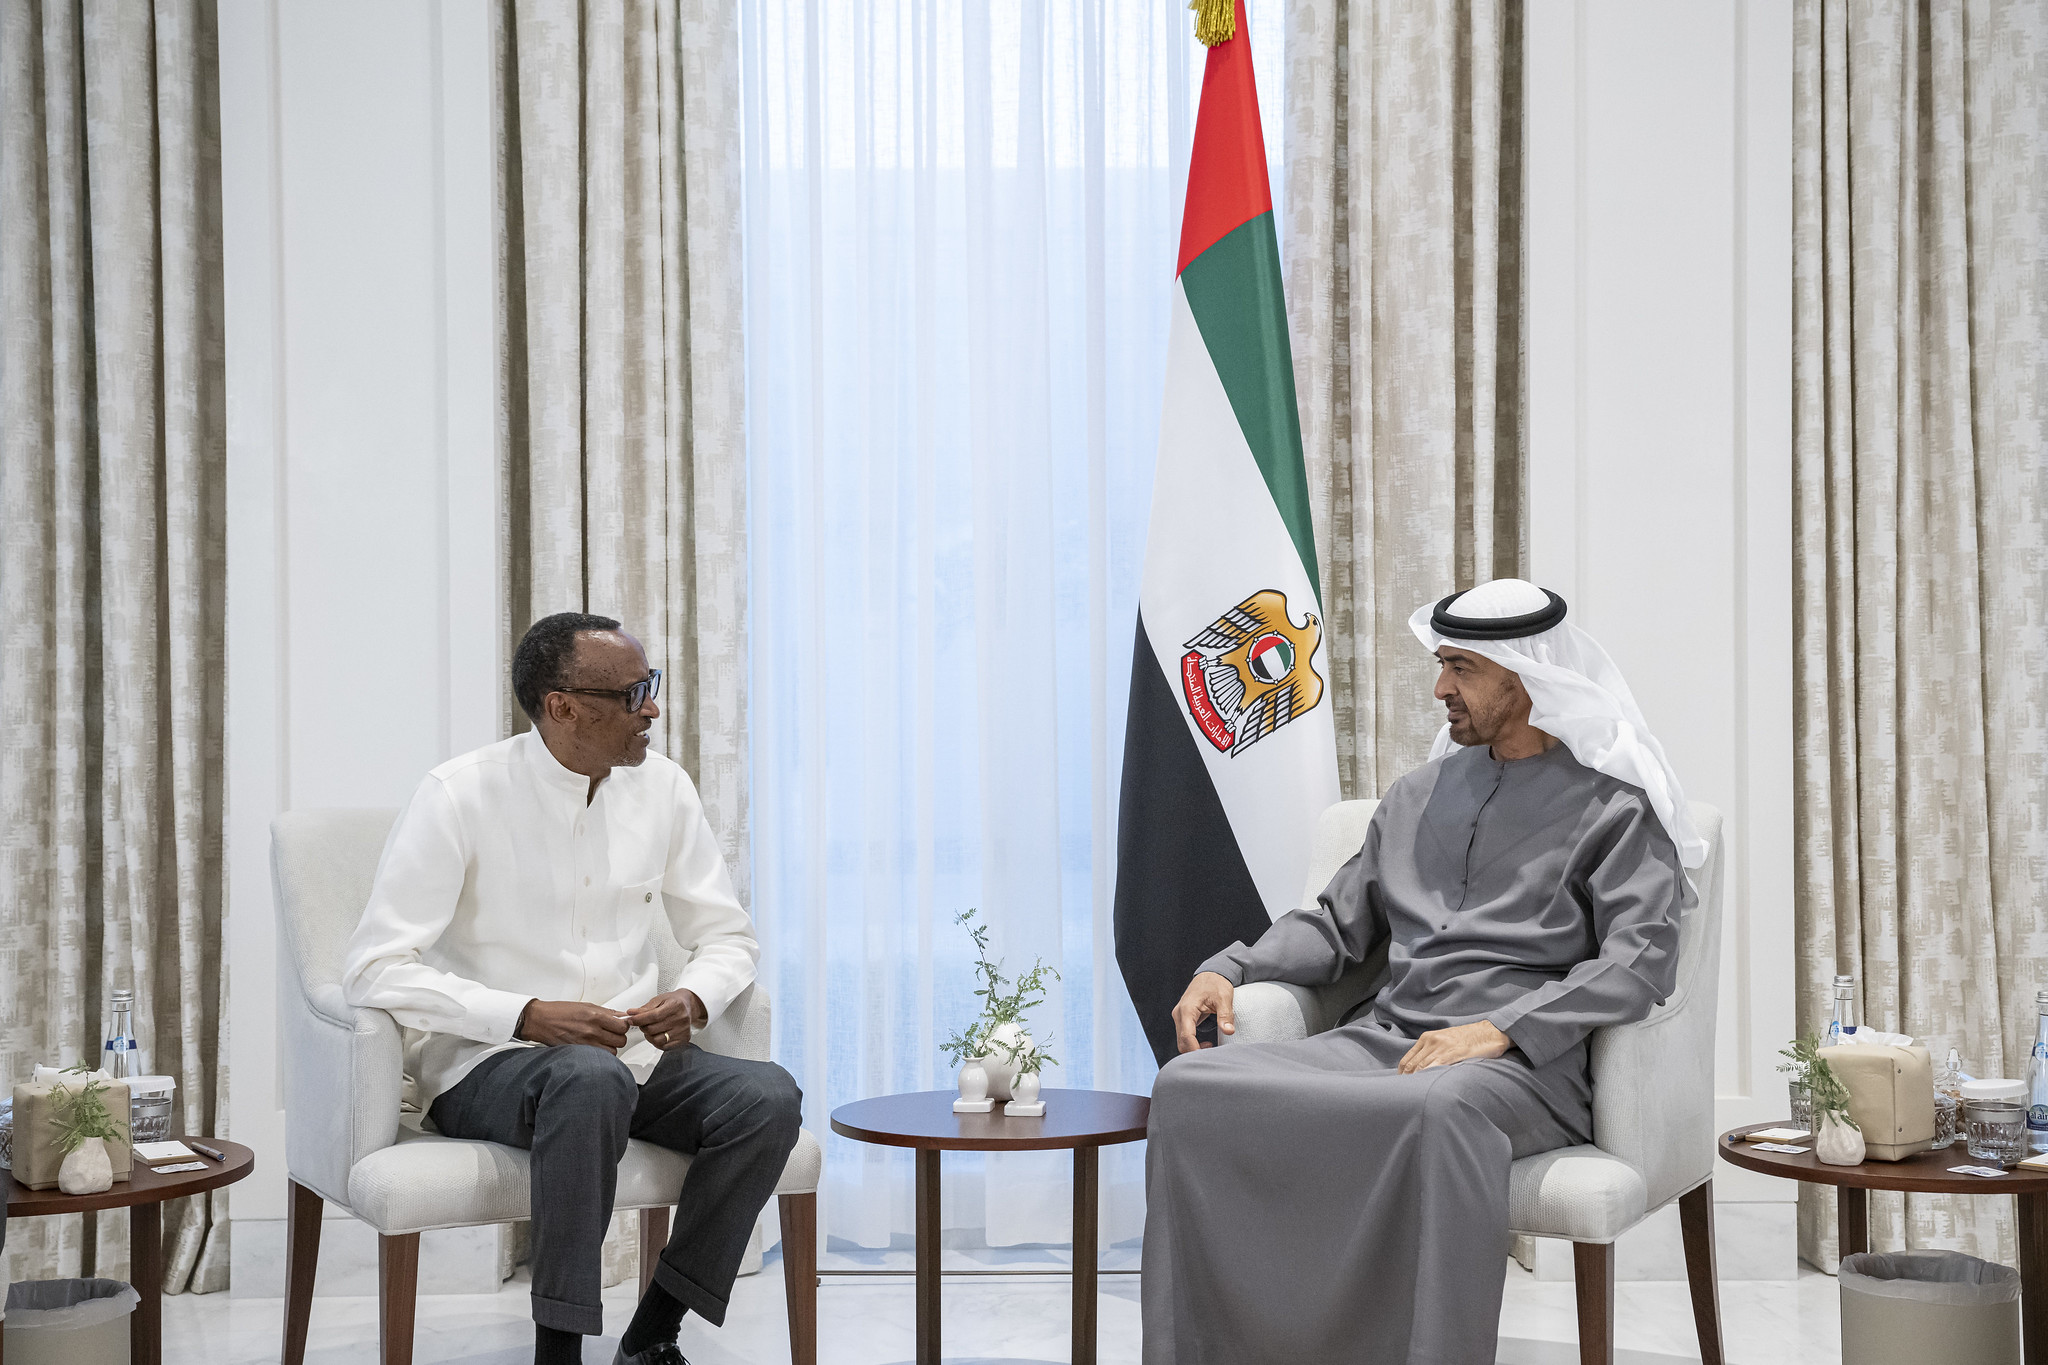 President Kagame met with  His Highness Sheikh Mohamed bin Zayed Al Nahyan  and presented his condolences for the passing of H.H. Sheikh Khalifa bin Zayed Al Nahyan in Abu Dhabi on June 15. Photo by Village Urugwiro